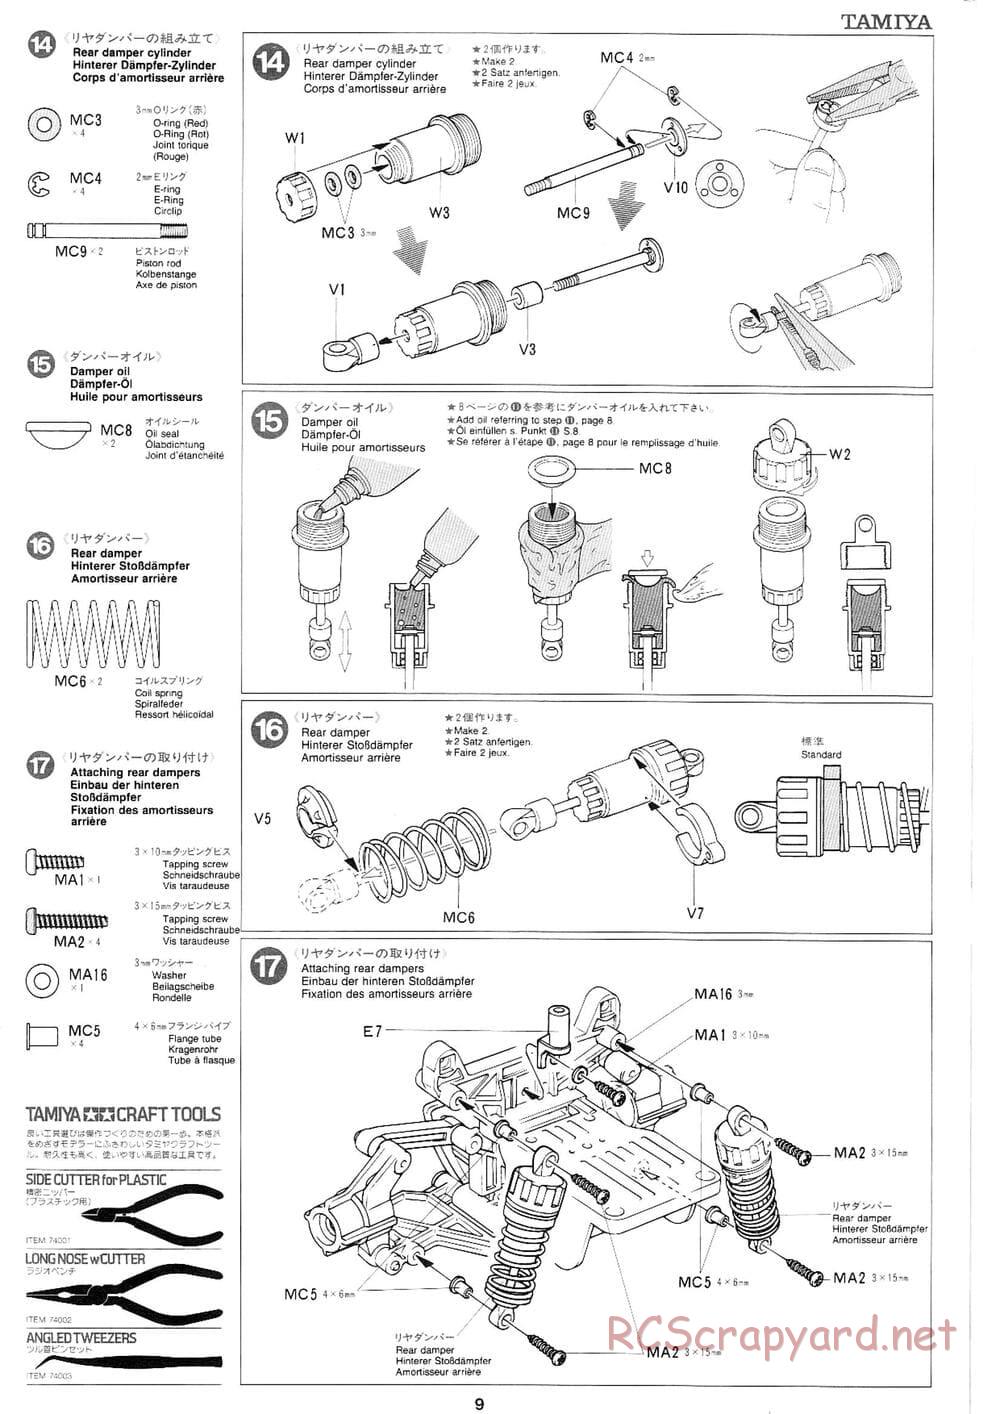 Tamiya - Volkswagen New Beetle - FF-01 Chassis - Manual - Page 7